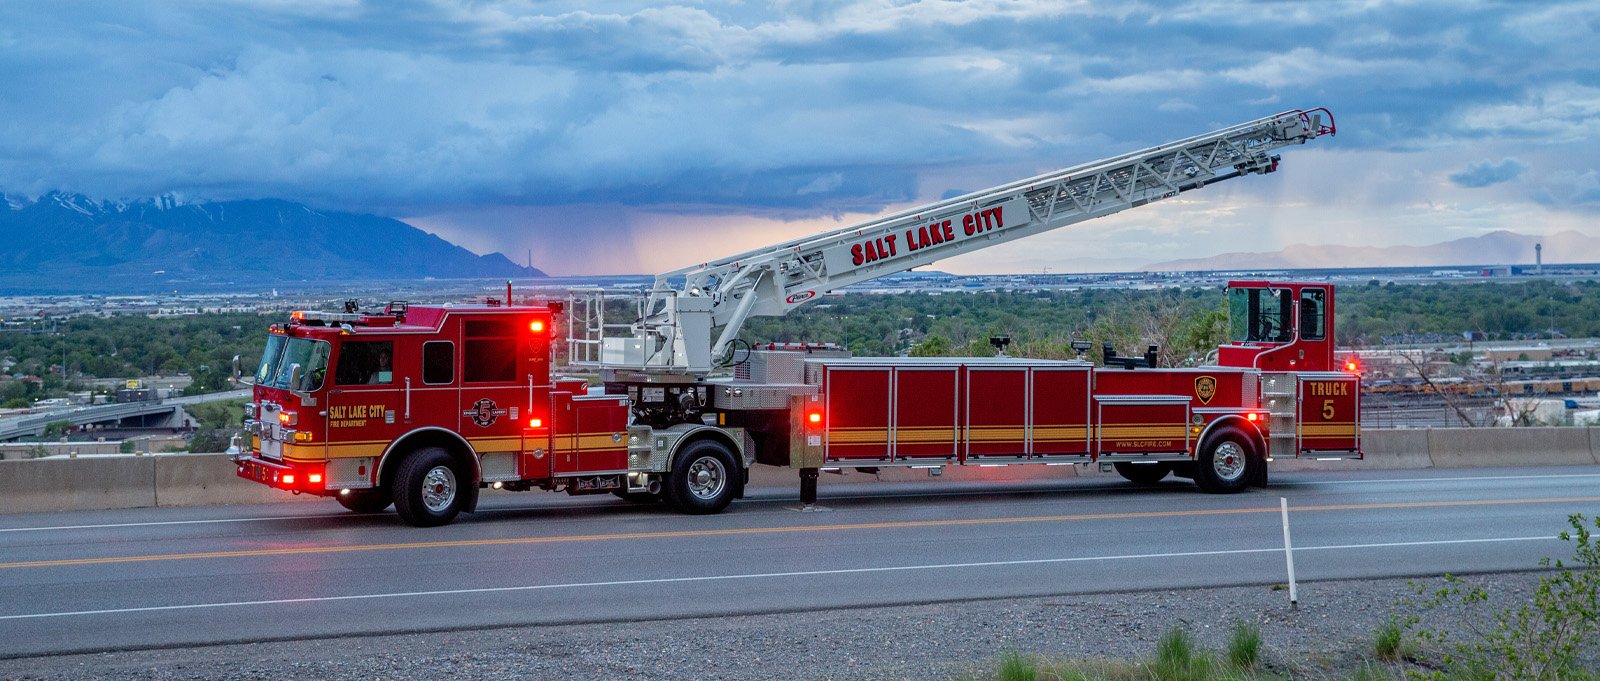 A red tiller truck is parked at sunset with its ladder raised in the air.